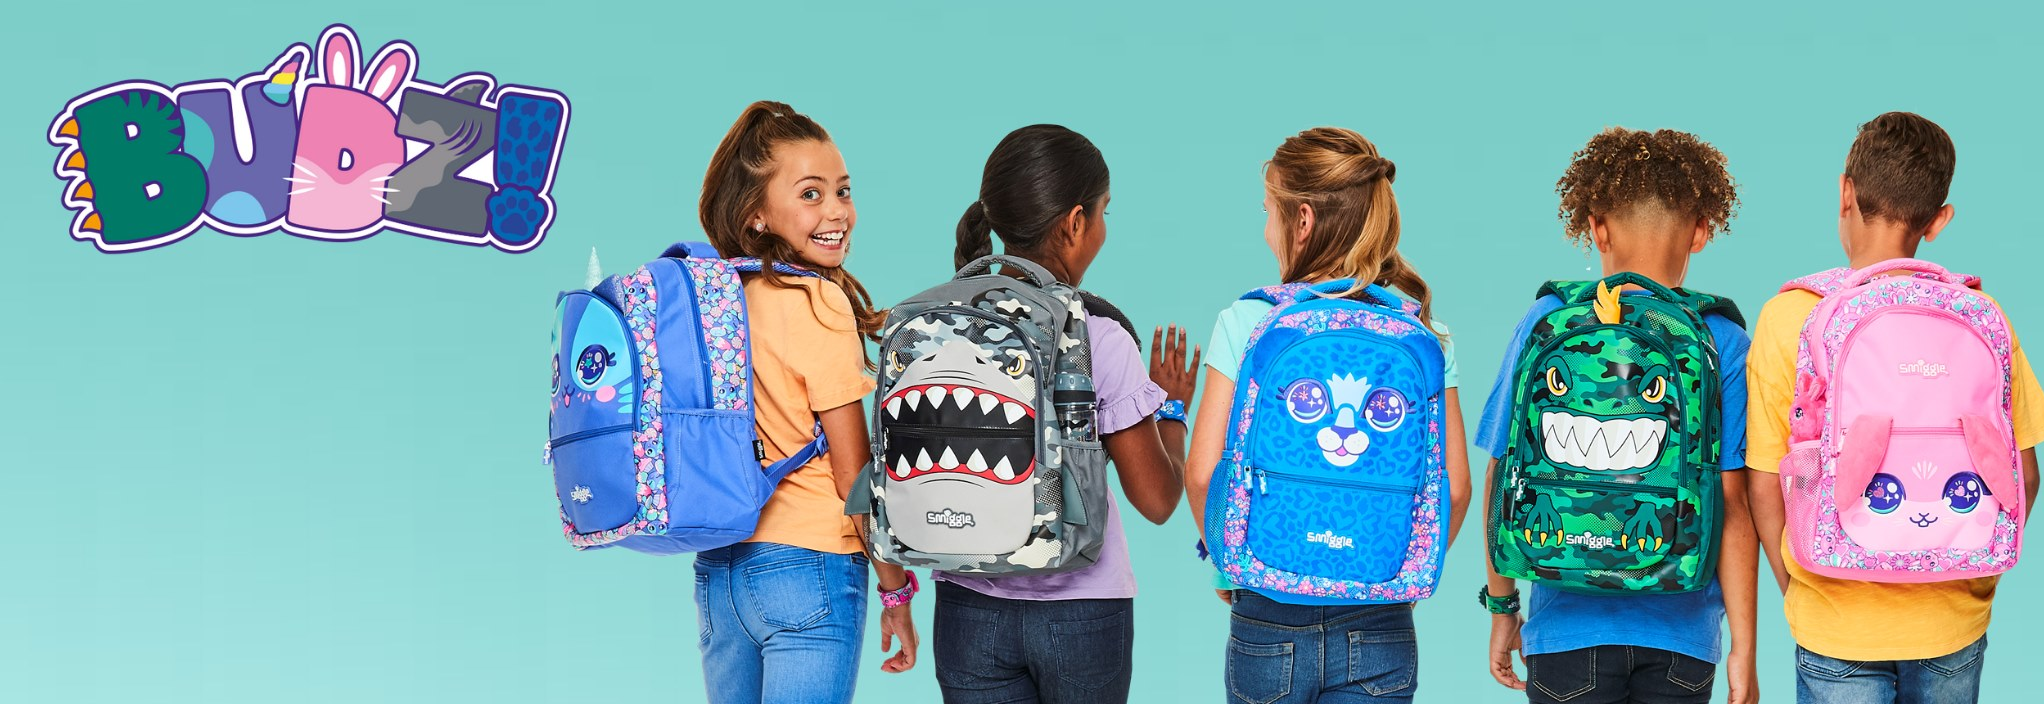 All Smiggle Deals & Promotions